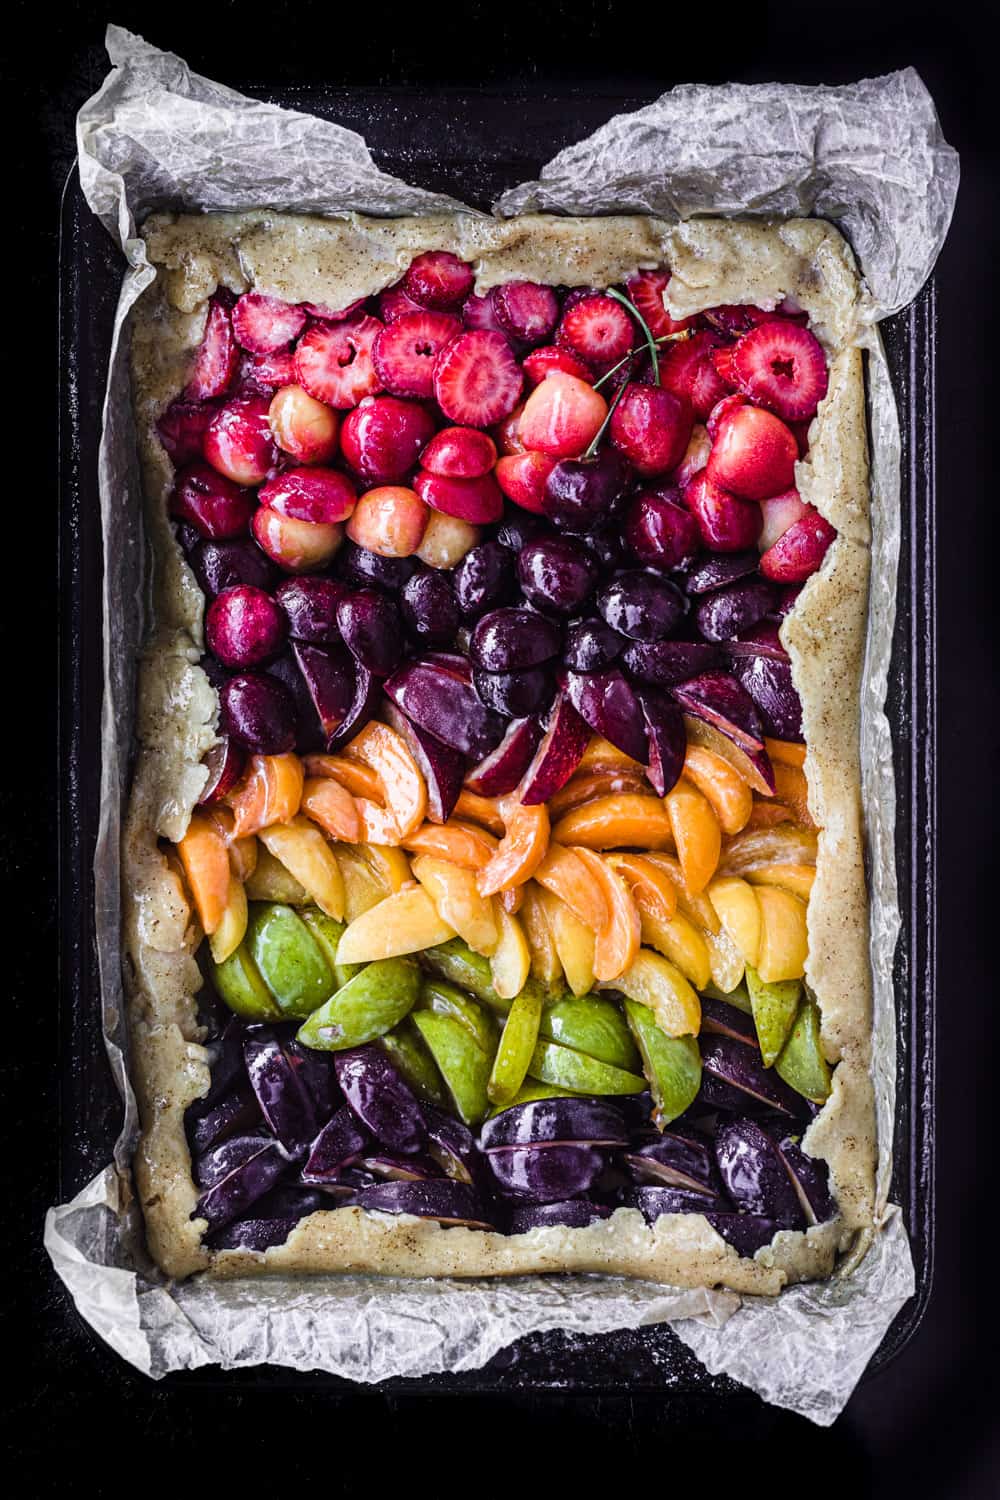 Pre-oven colorful stone fruit galette in a pan; overhead on a black background.